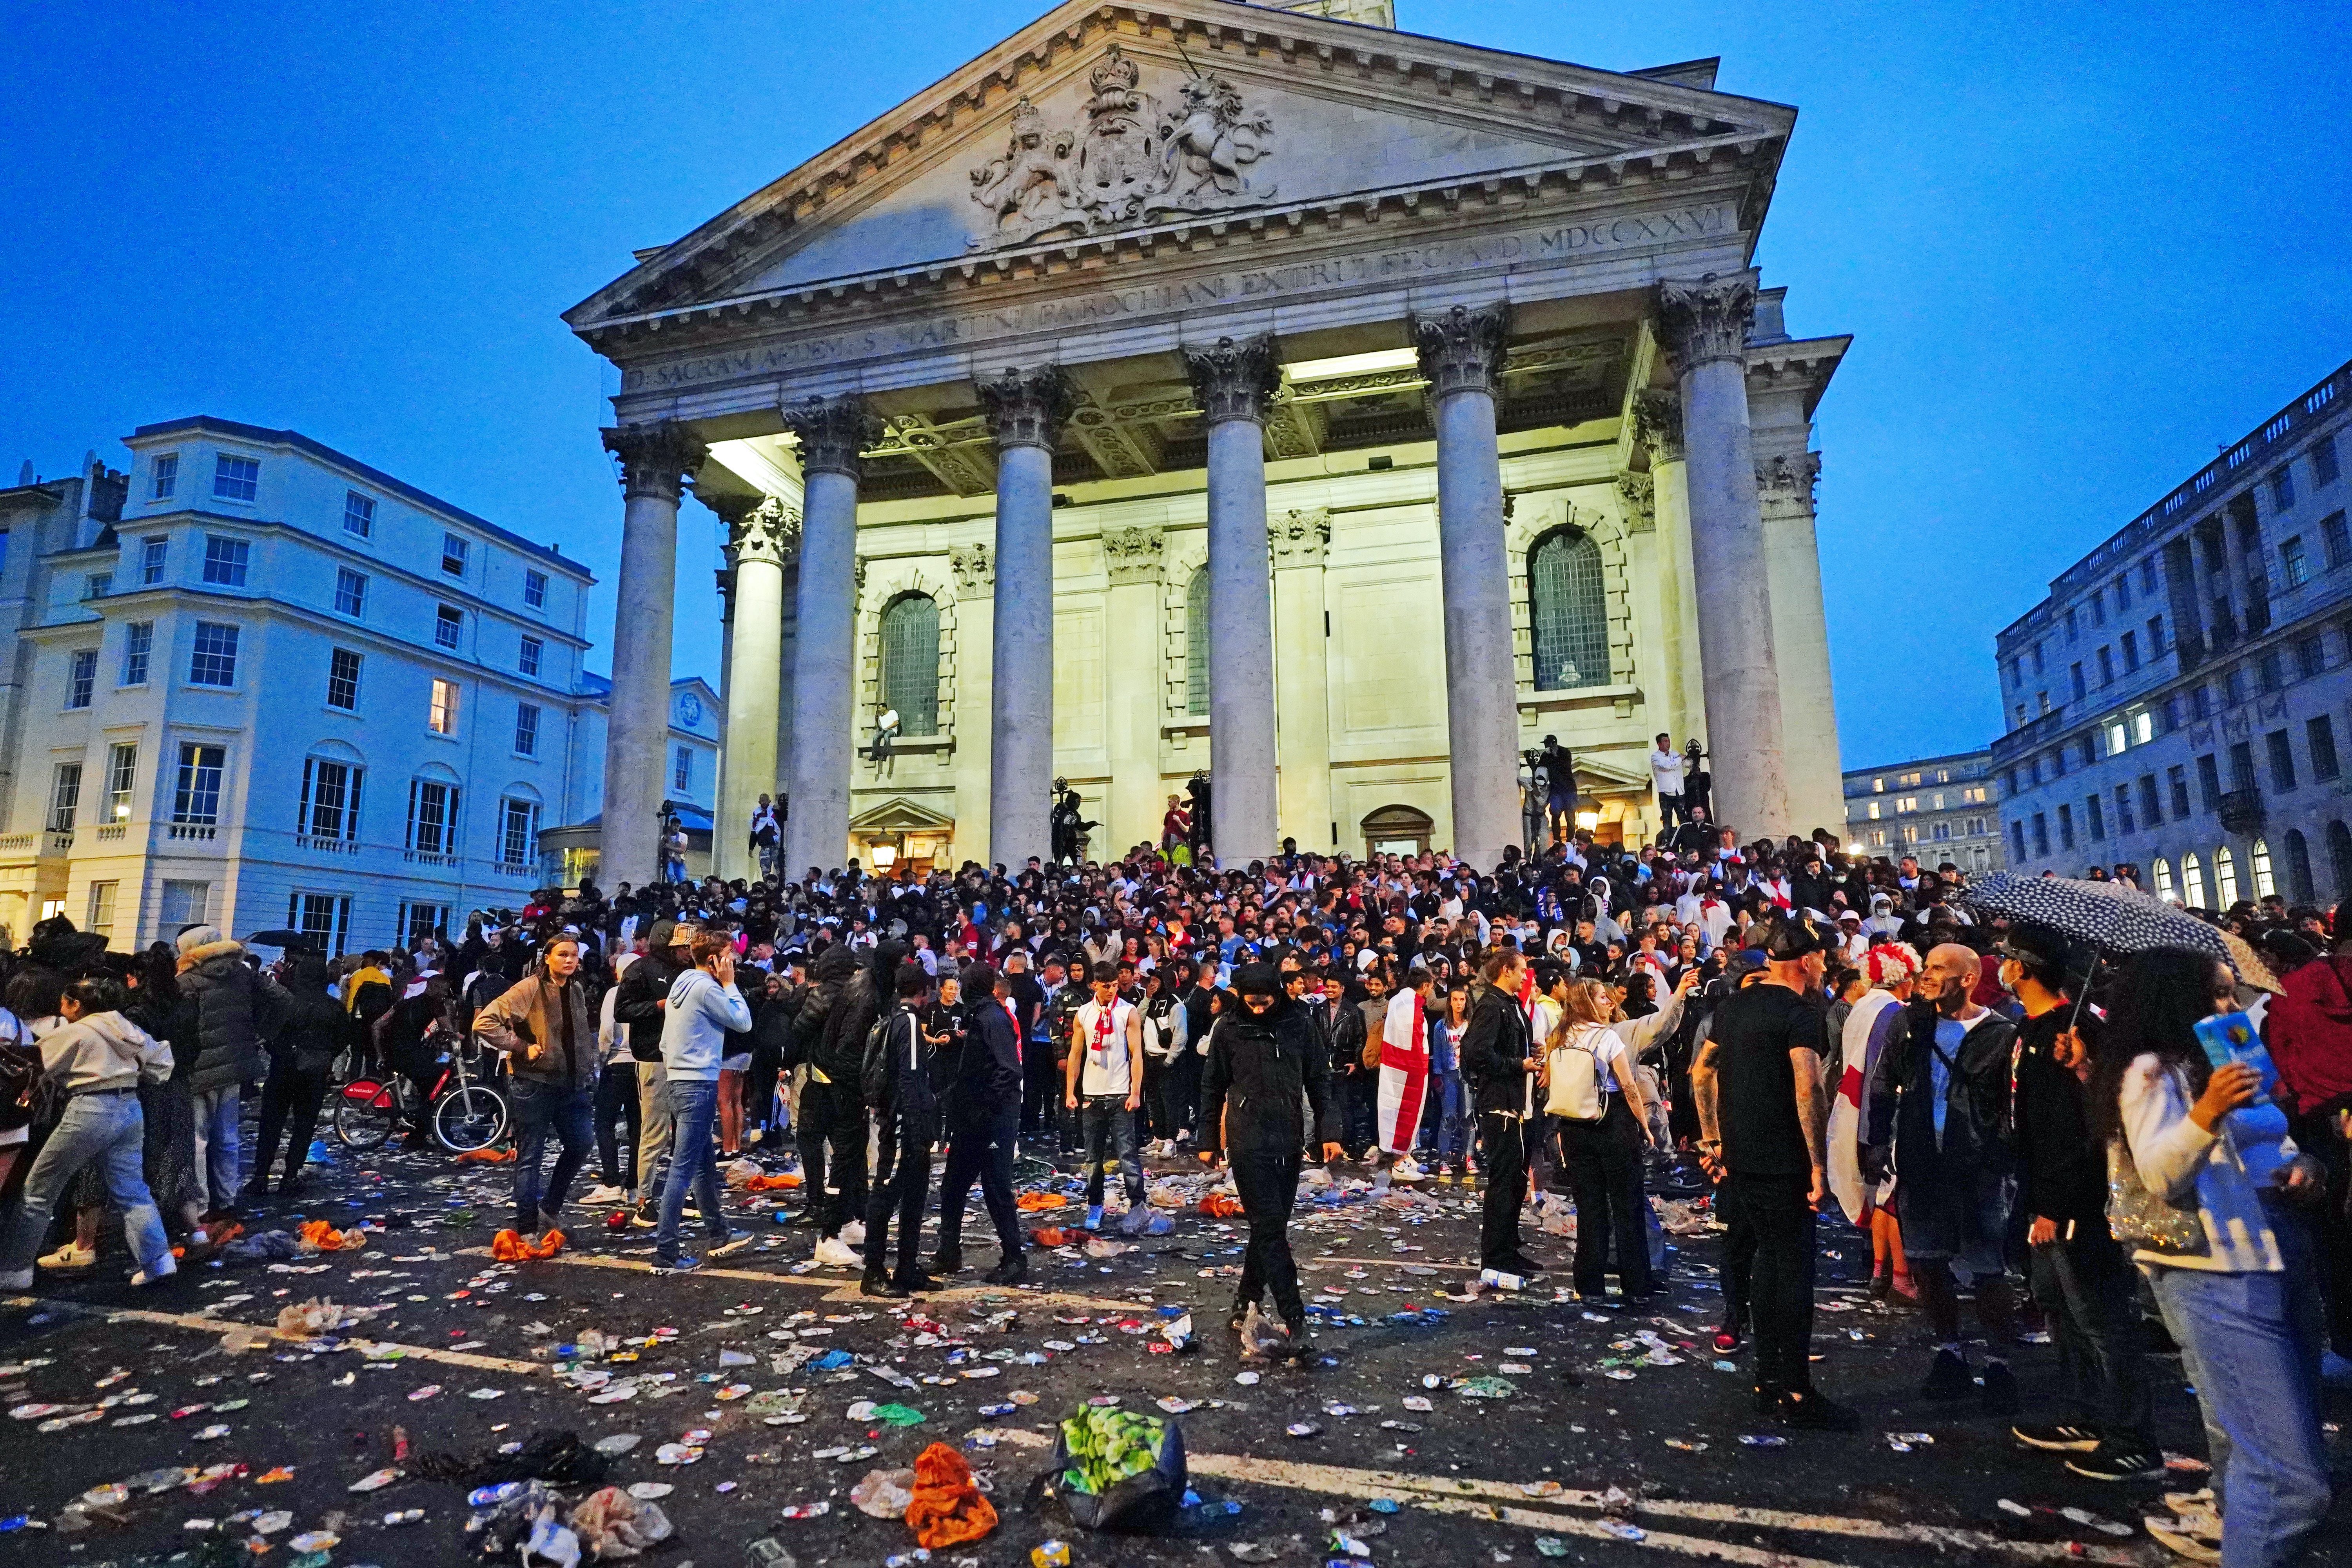 England fans at St Martin-in-the-Fields next to Trafalgar Square